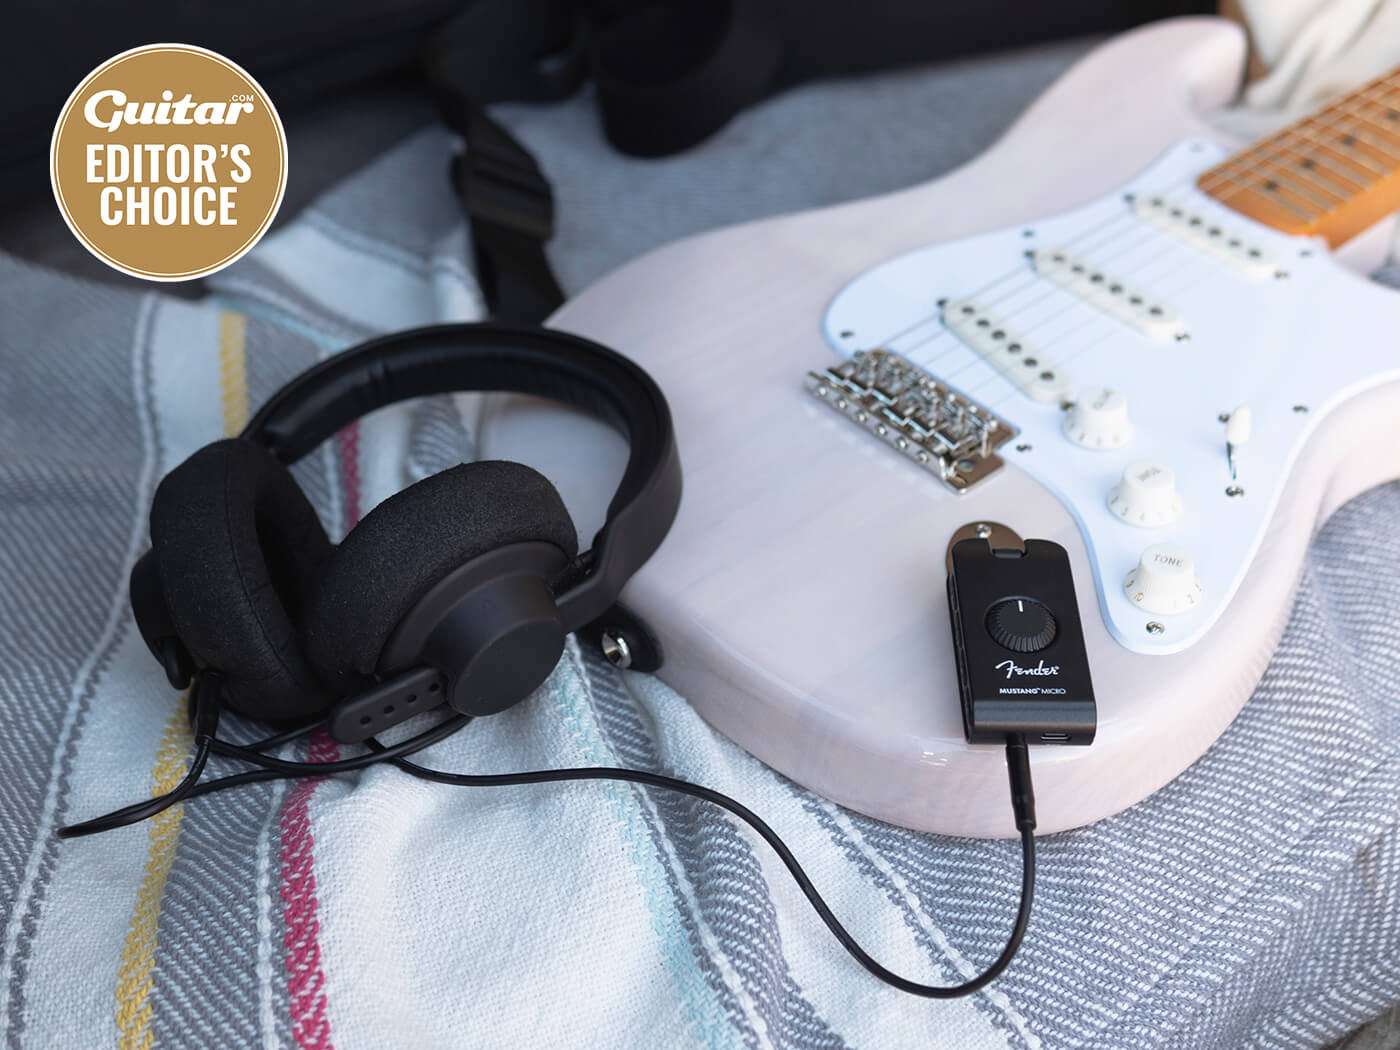 Fender Mustang Micro Review: The ultimate portable practice 